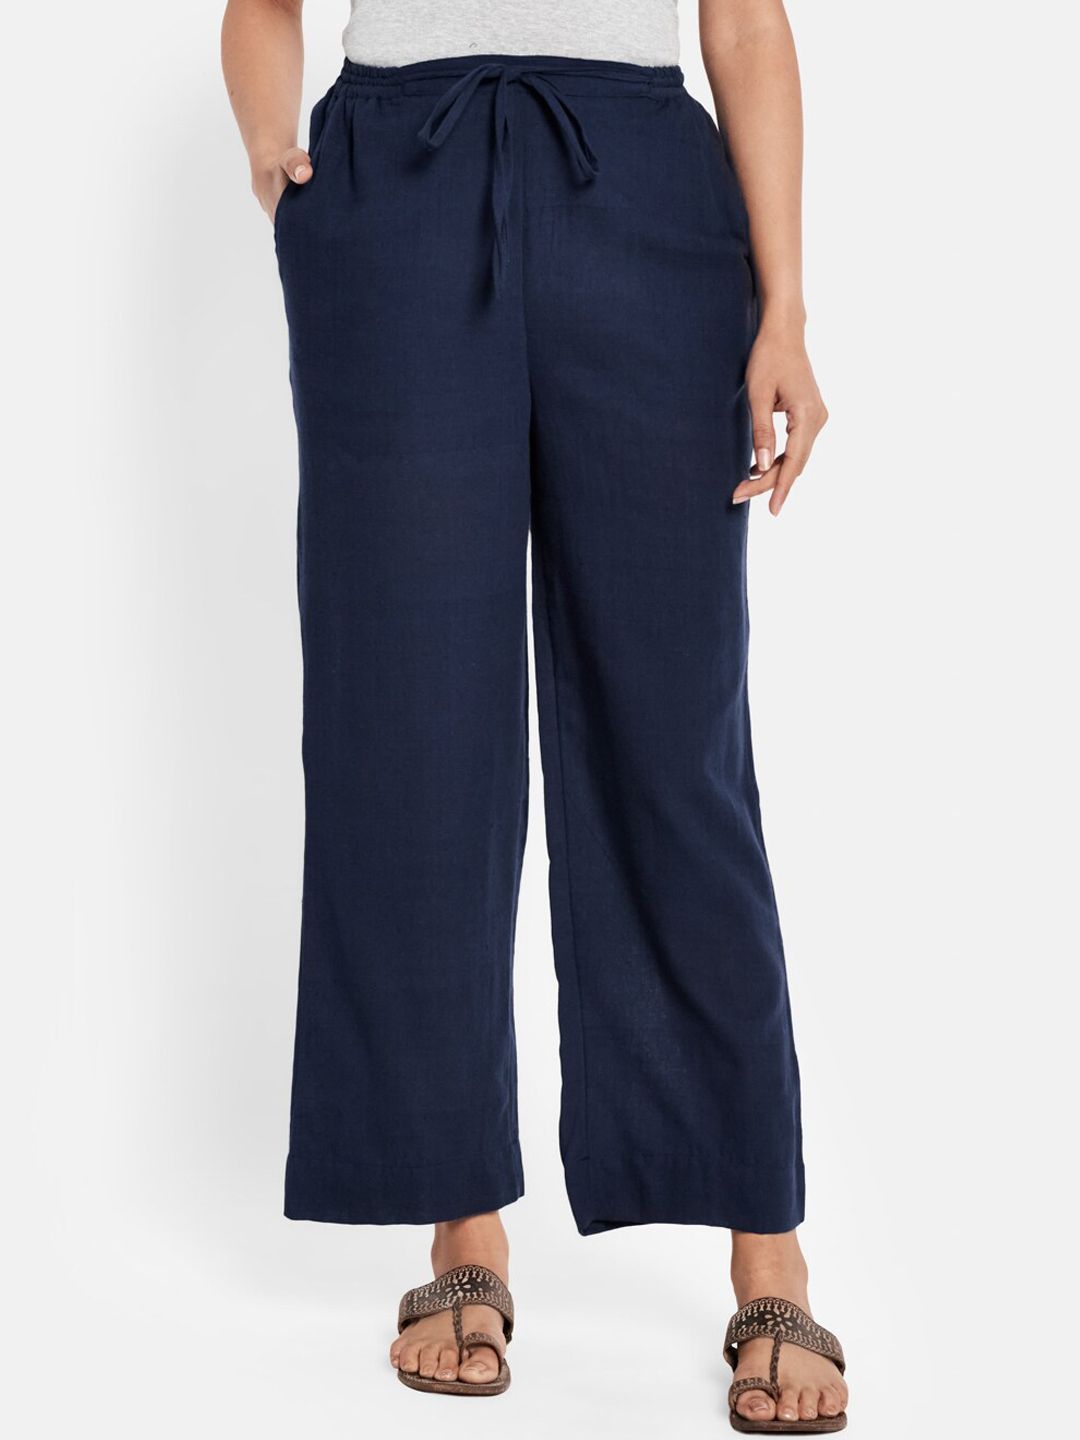 Fabindia Women Blue Solid Cotton Trousers Price in India